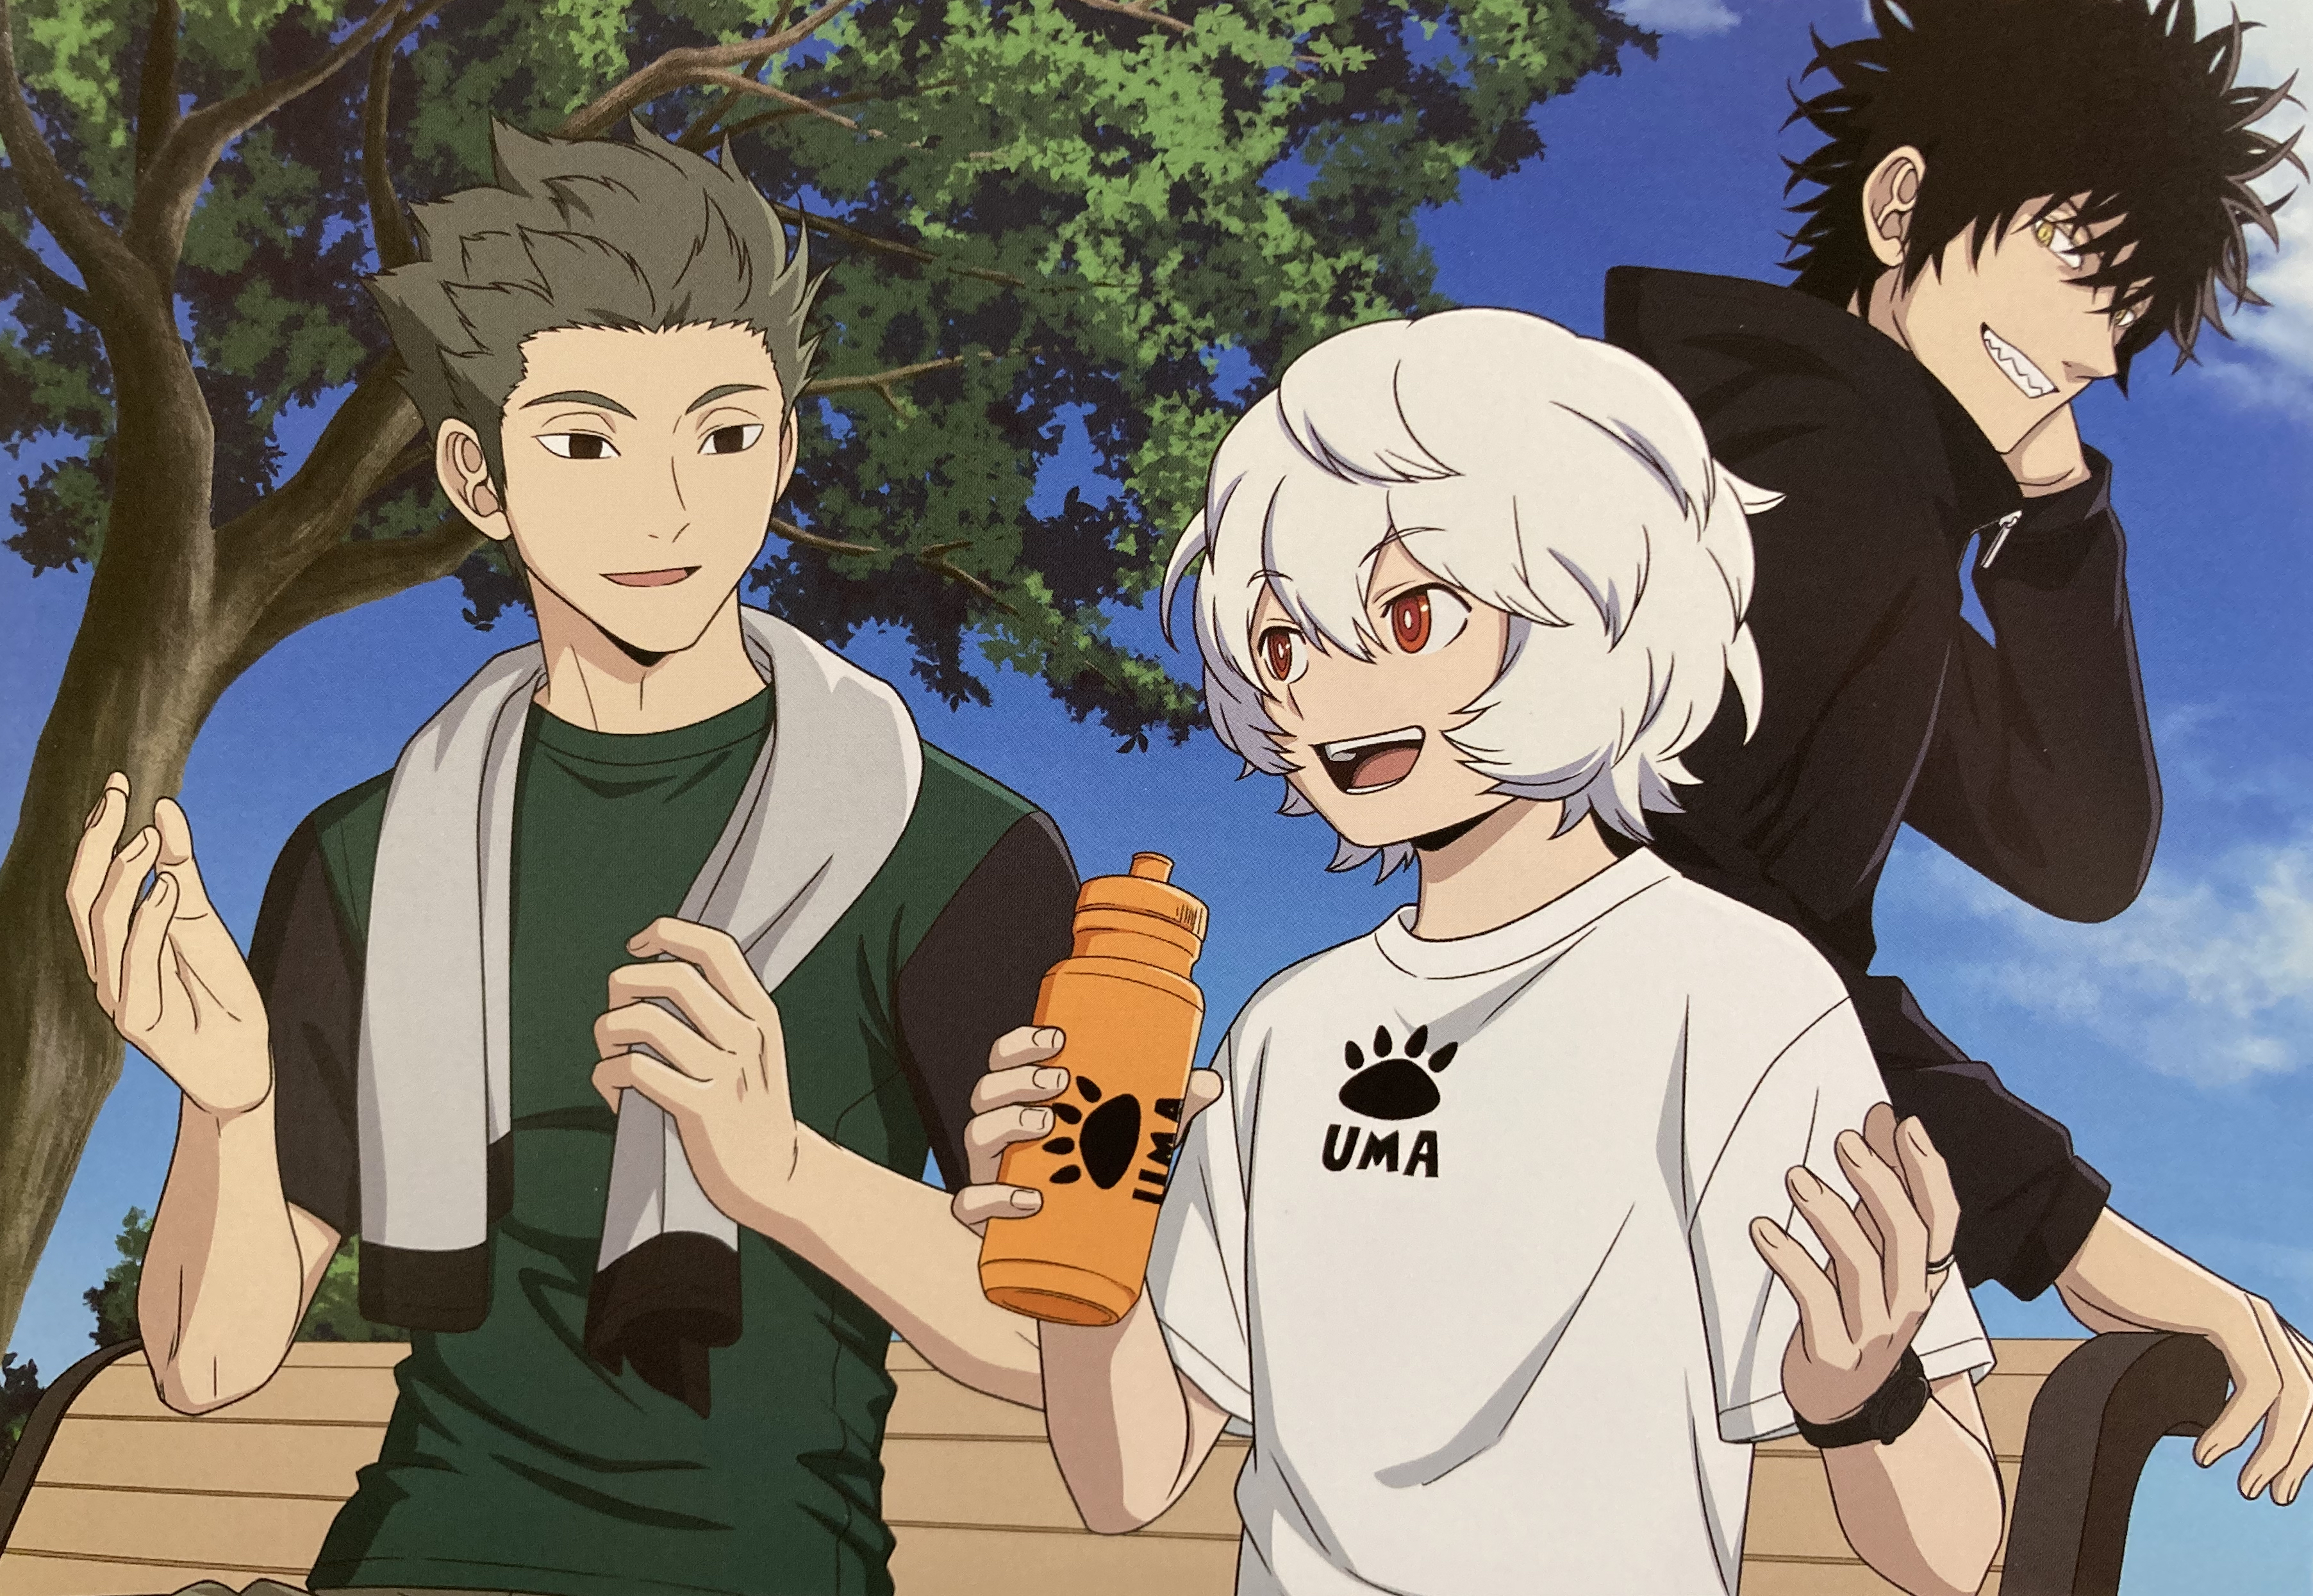 Kou, Kage, and Kuga after working out.